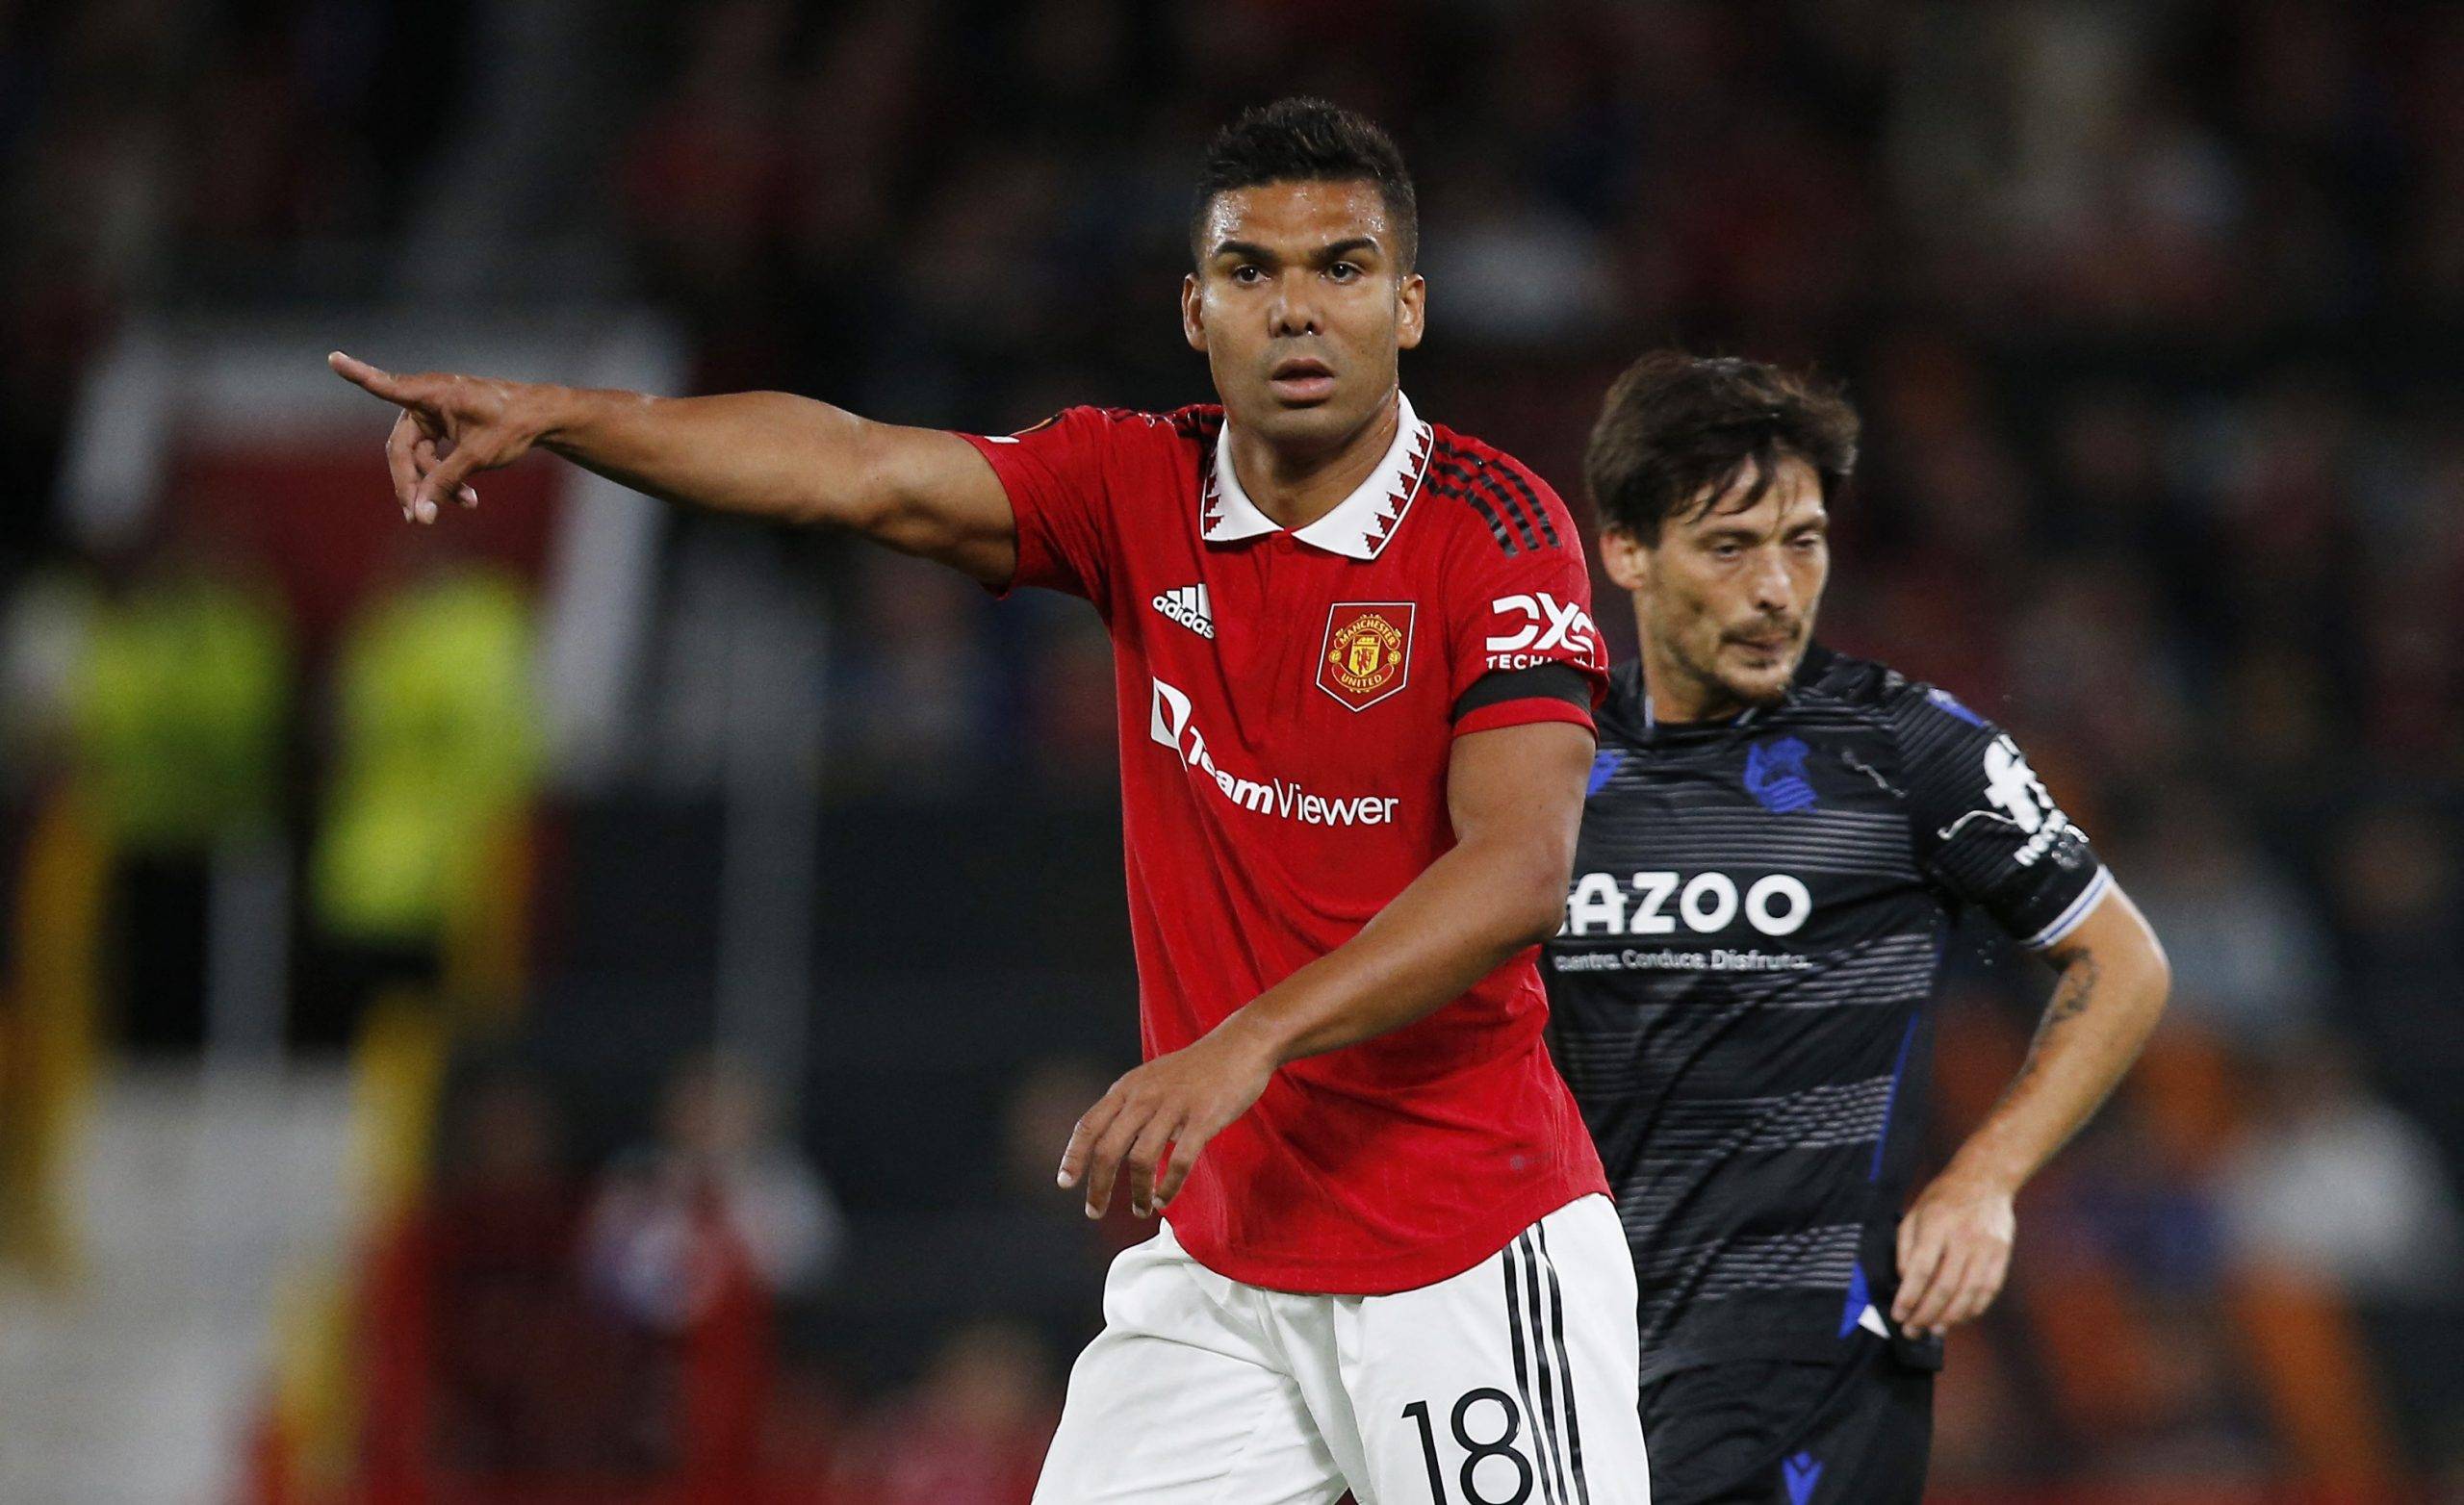 Manchester United told to use Casemiro in advanced role - Follow up